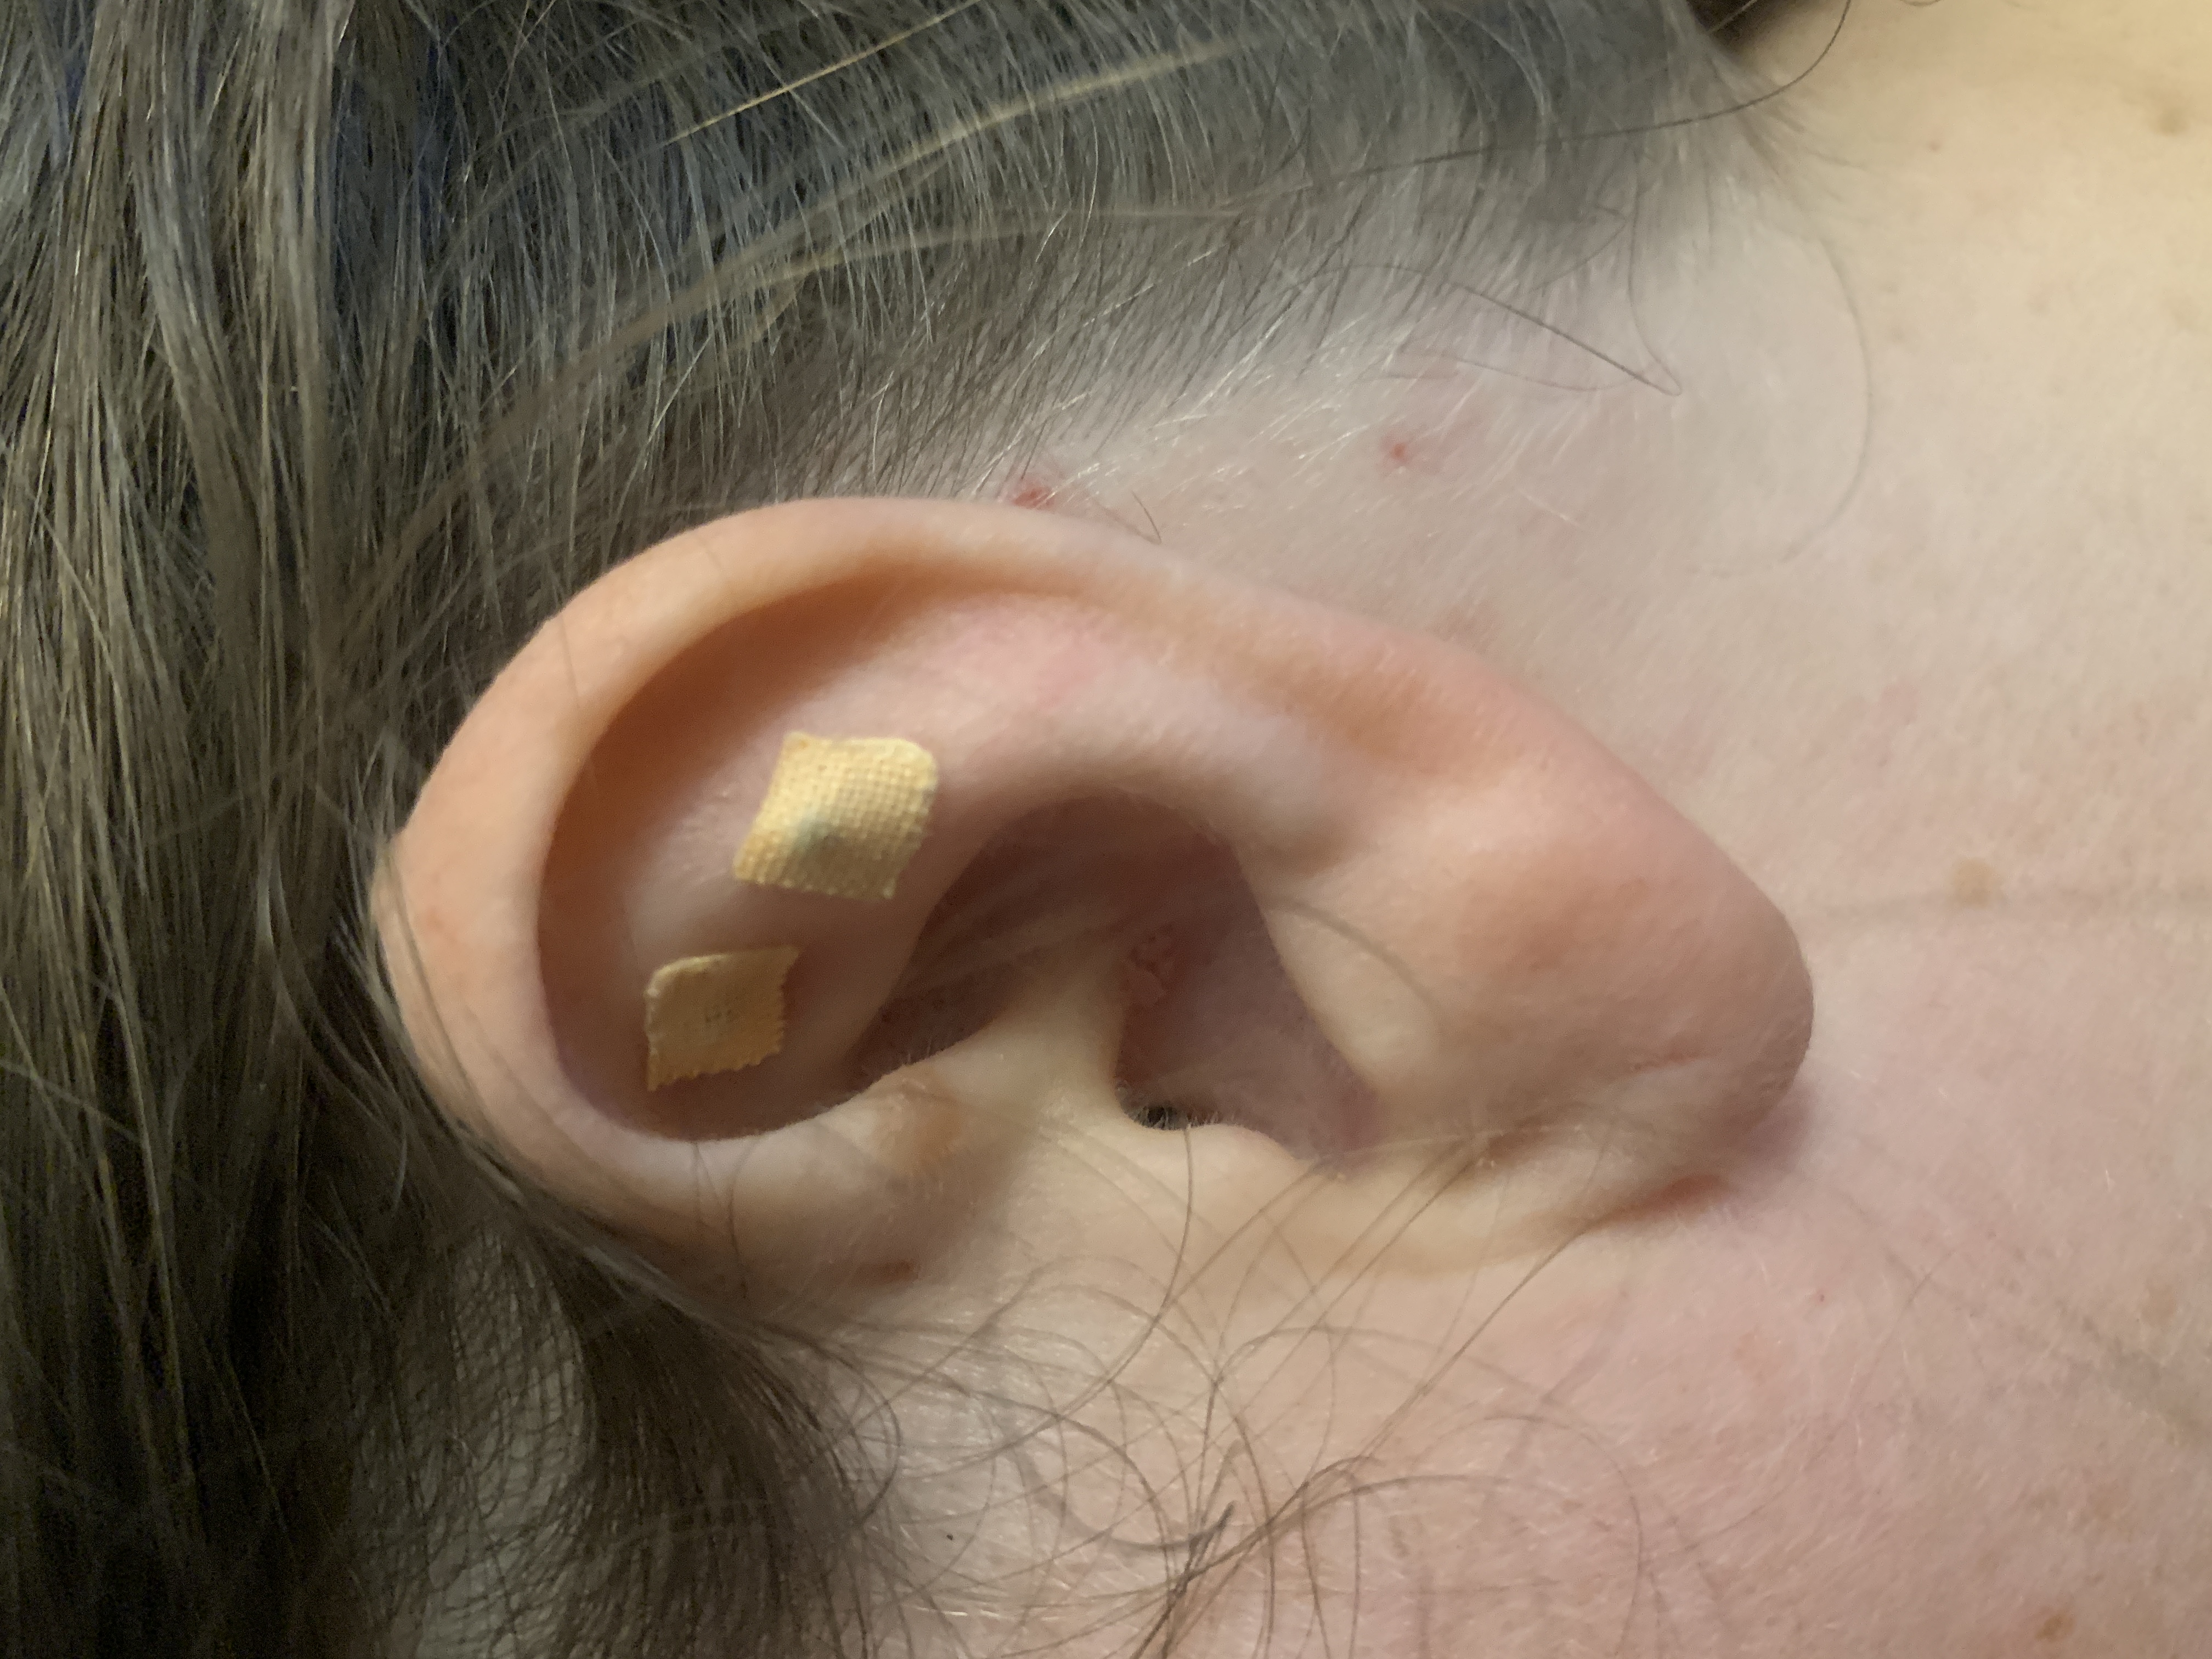 Ear Seeds May Help a Number of Conditions